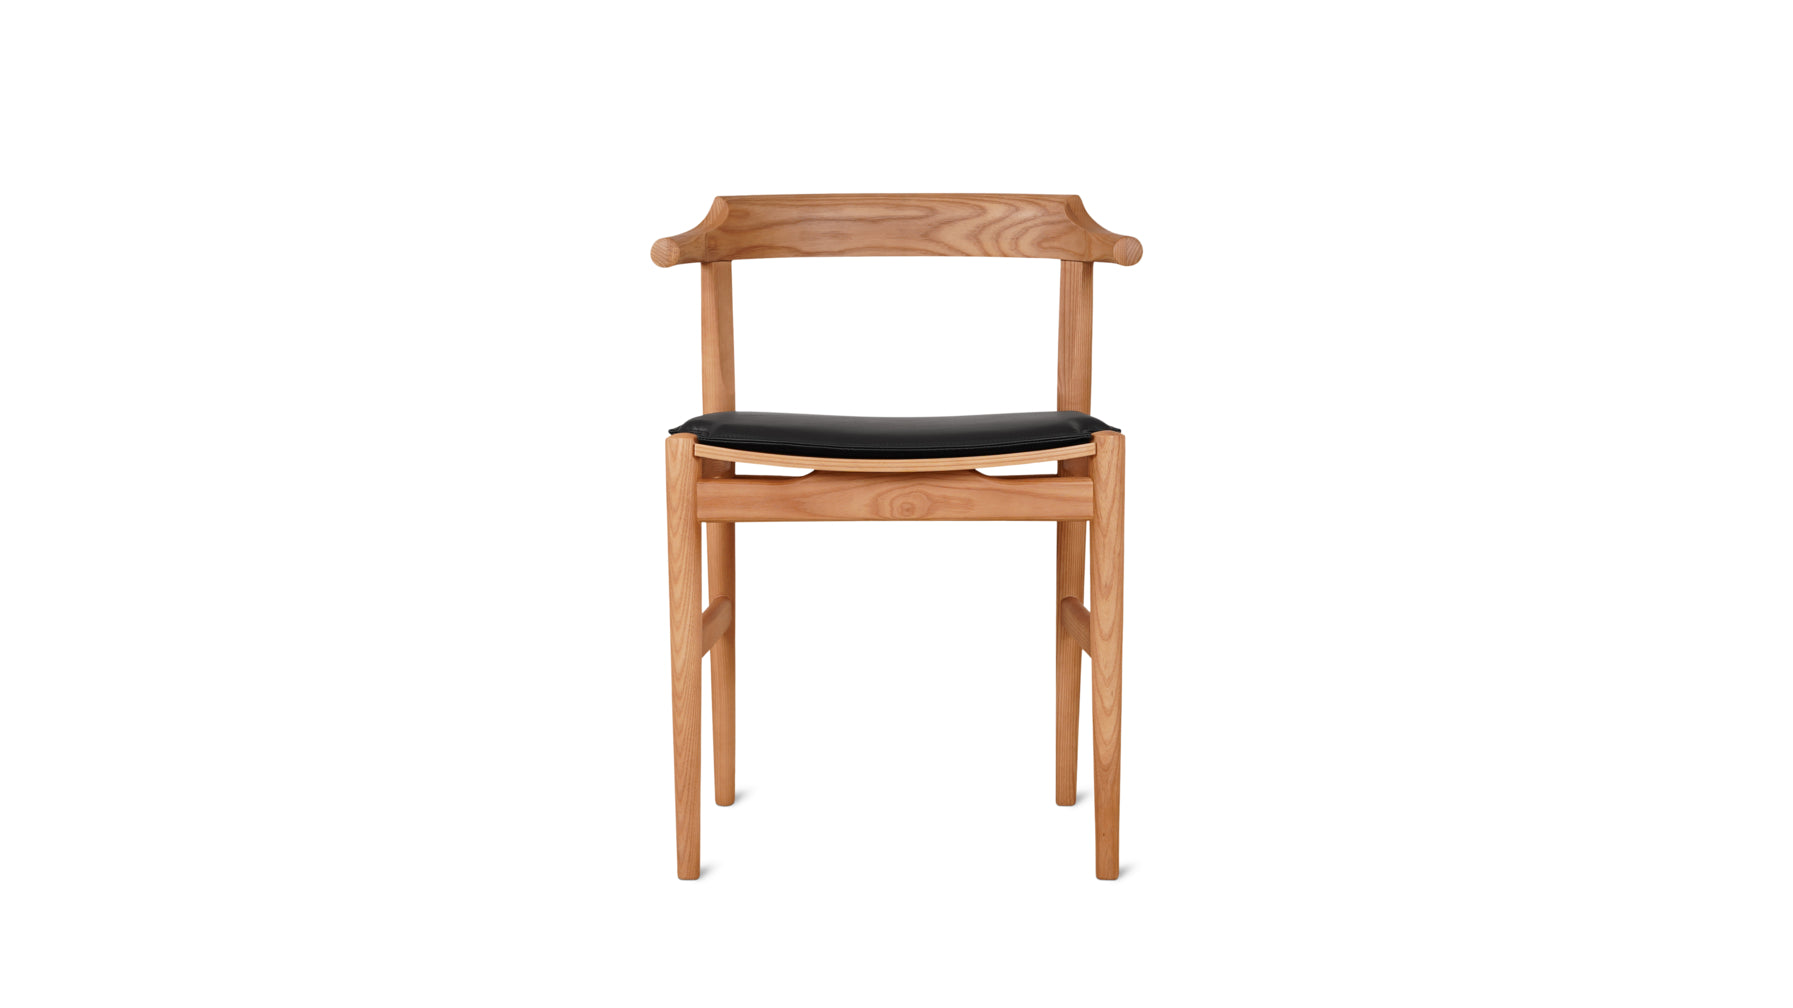 Tuck In Dining Chair with Cushion, White Oak, Wood Seat with Black Cushion - Image 1